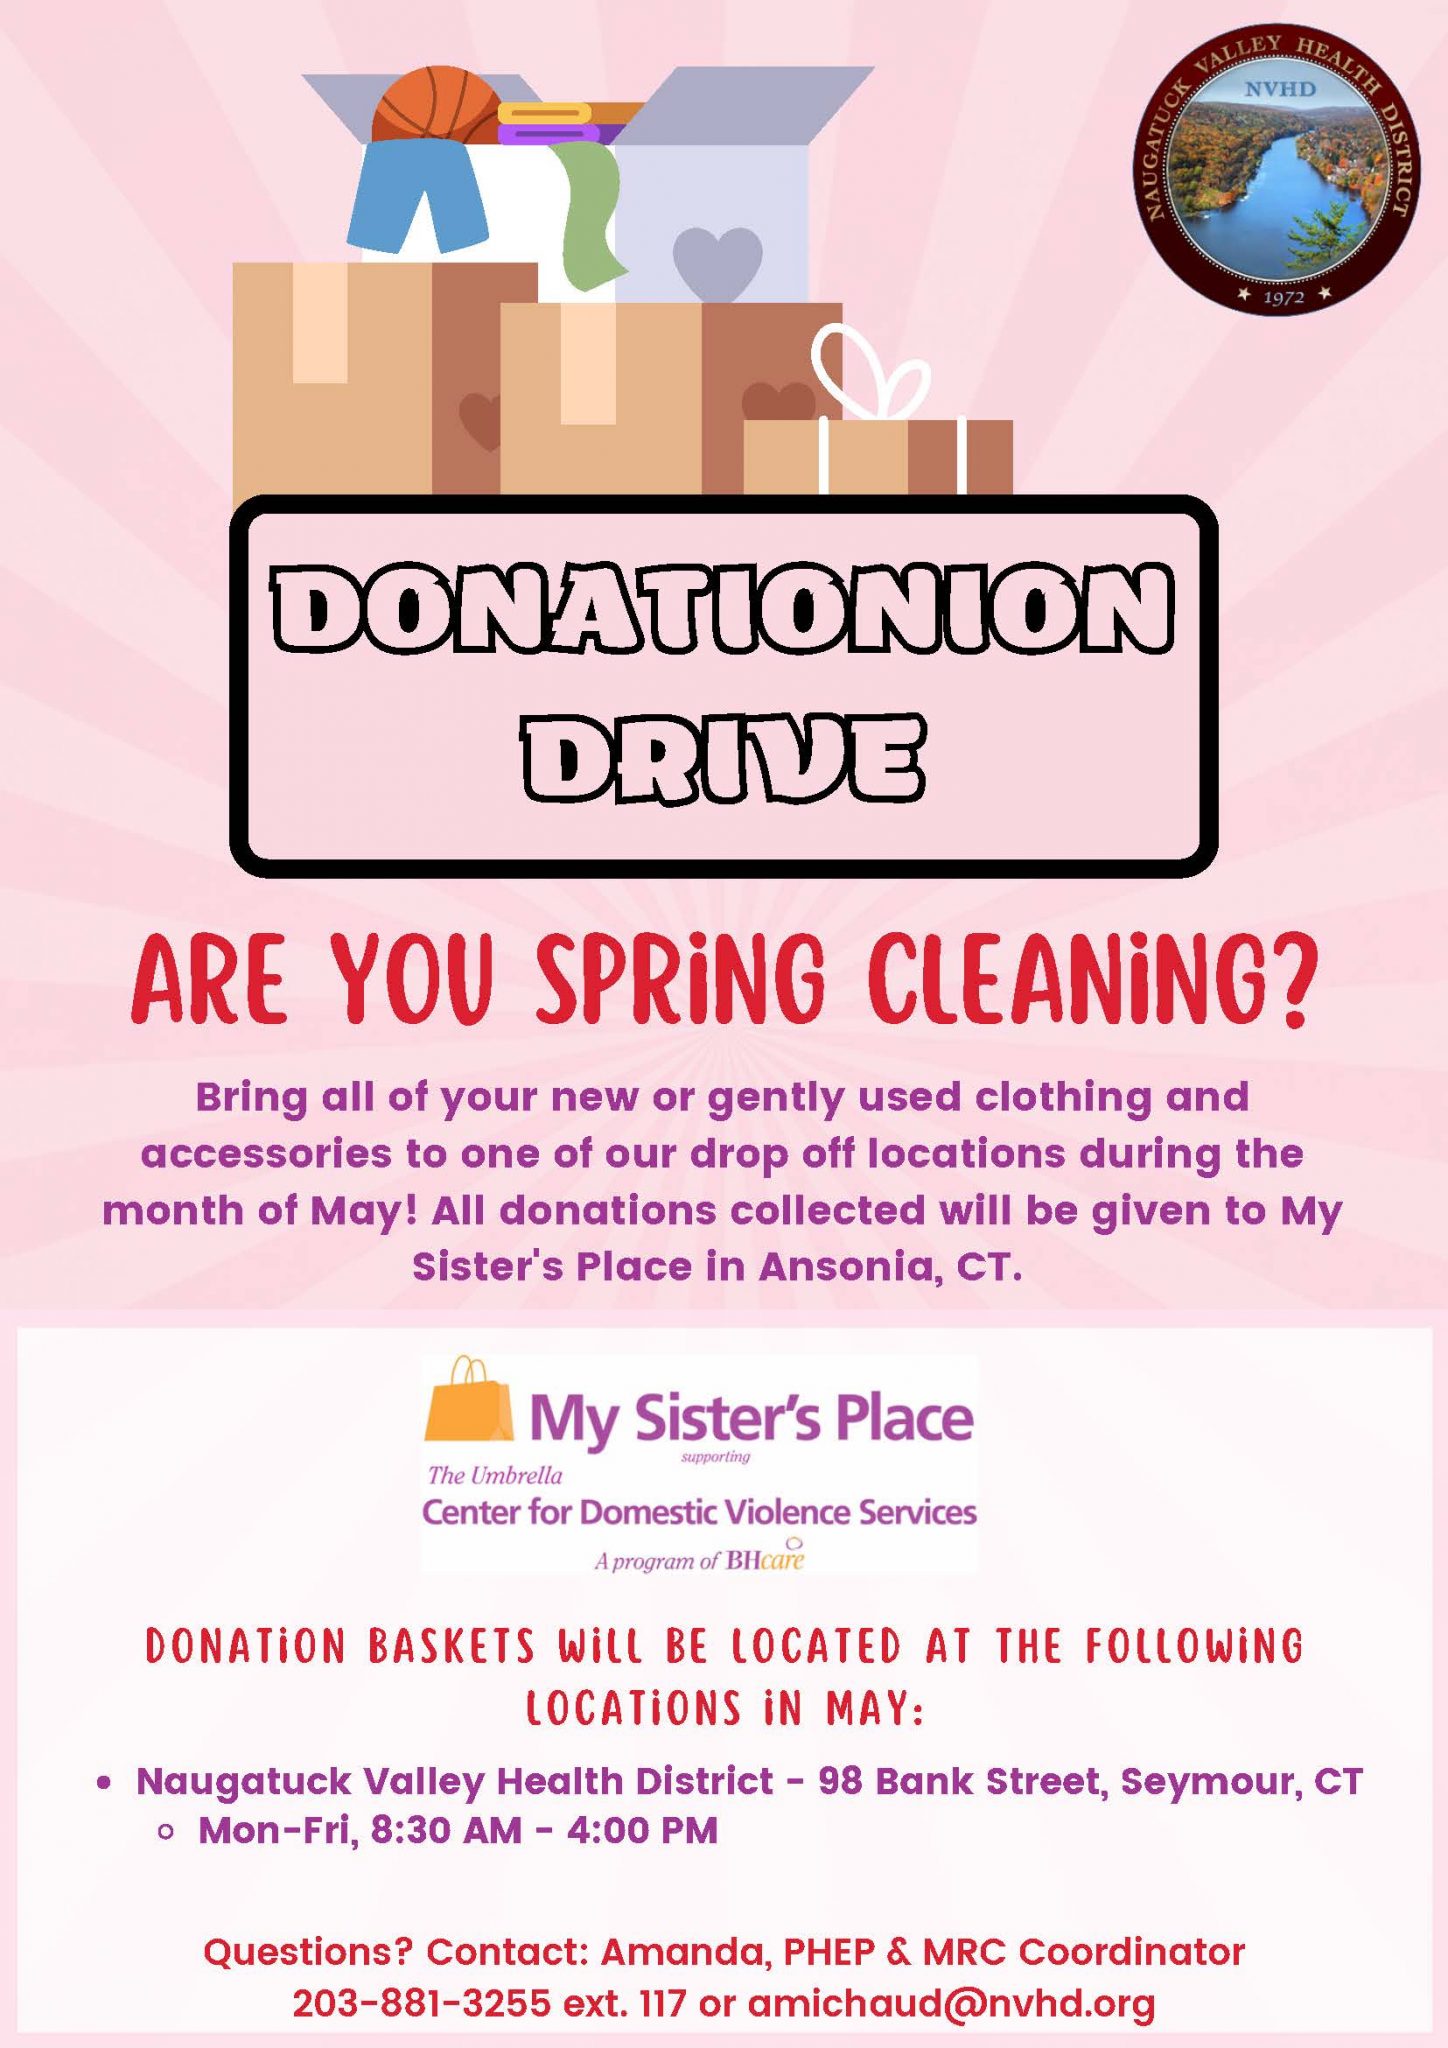 Donations for My Sister's Place - Naugatuck Valley Health District